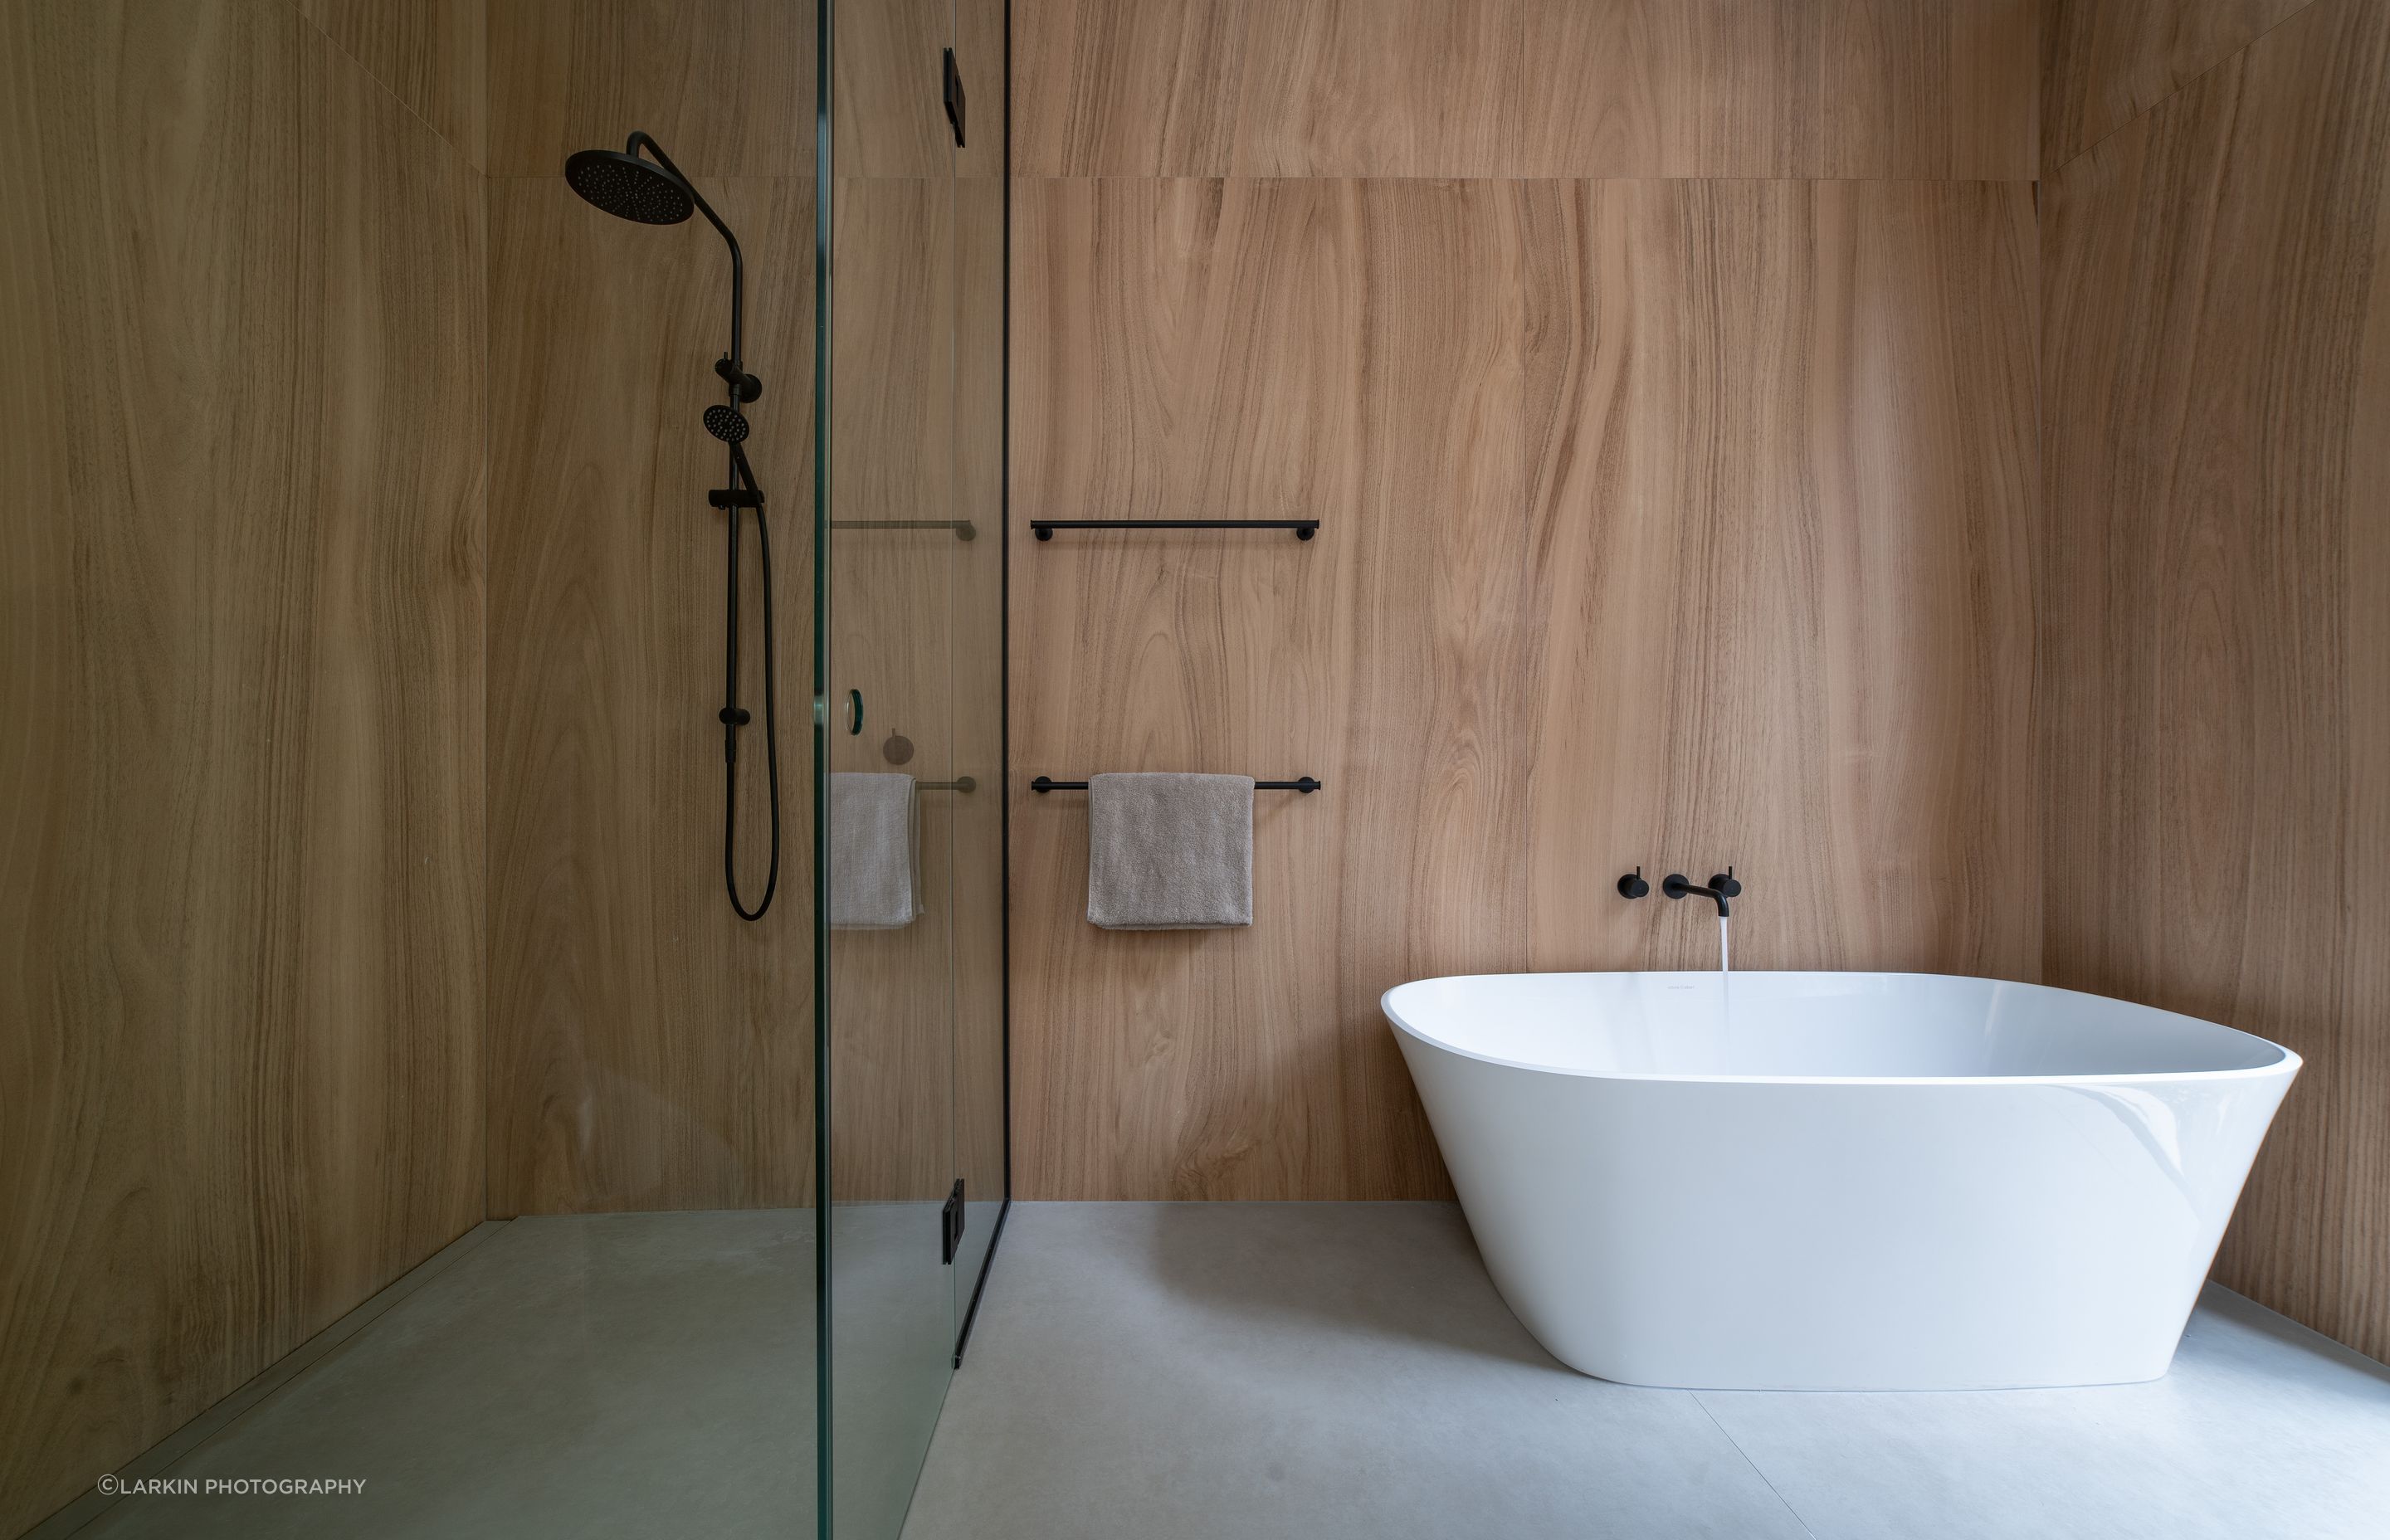 The bathroom continues the minimal approach to interior design with large format timber-look tiles and glass.